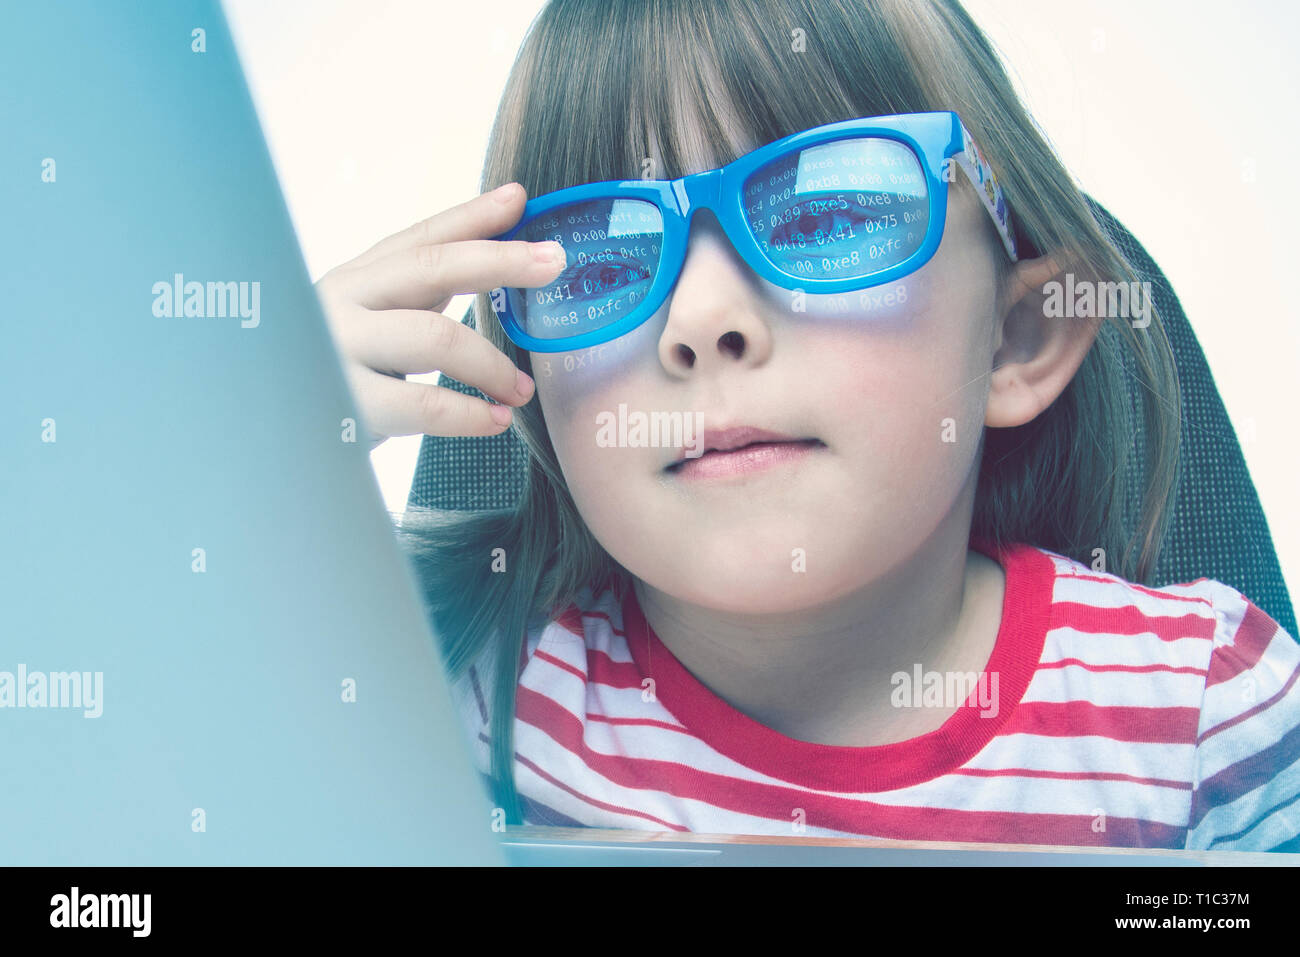 Technology genius concept. Little girl programming on a laptop Stock Photo